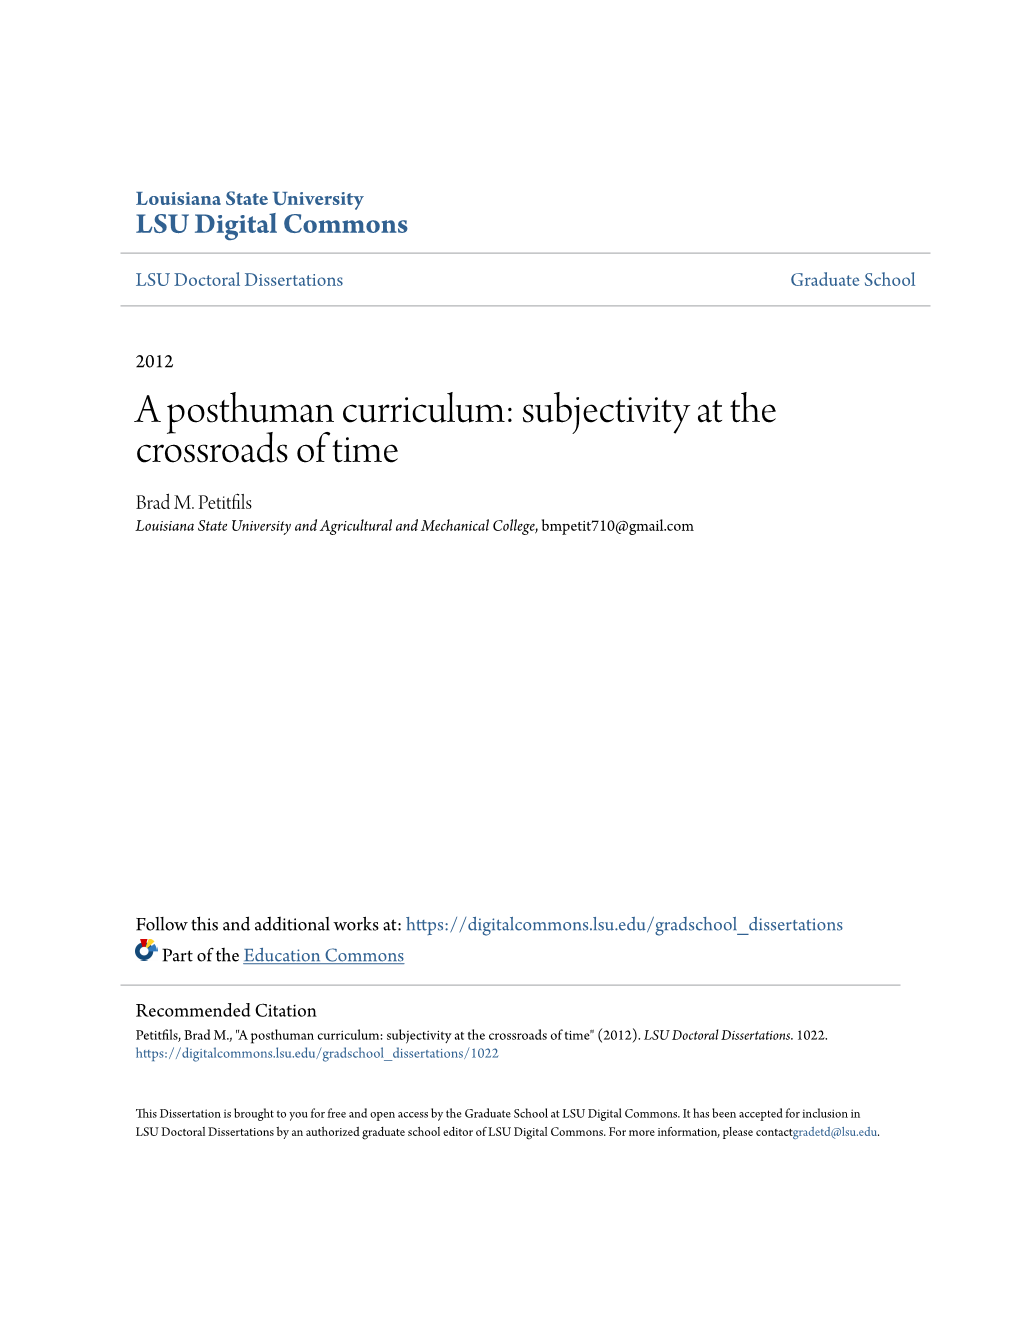 A Posthuman Curriculum: Subjectivity at the Crossroads of Time Brad M